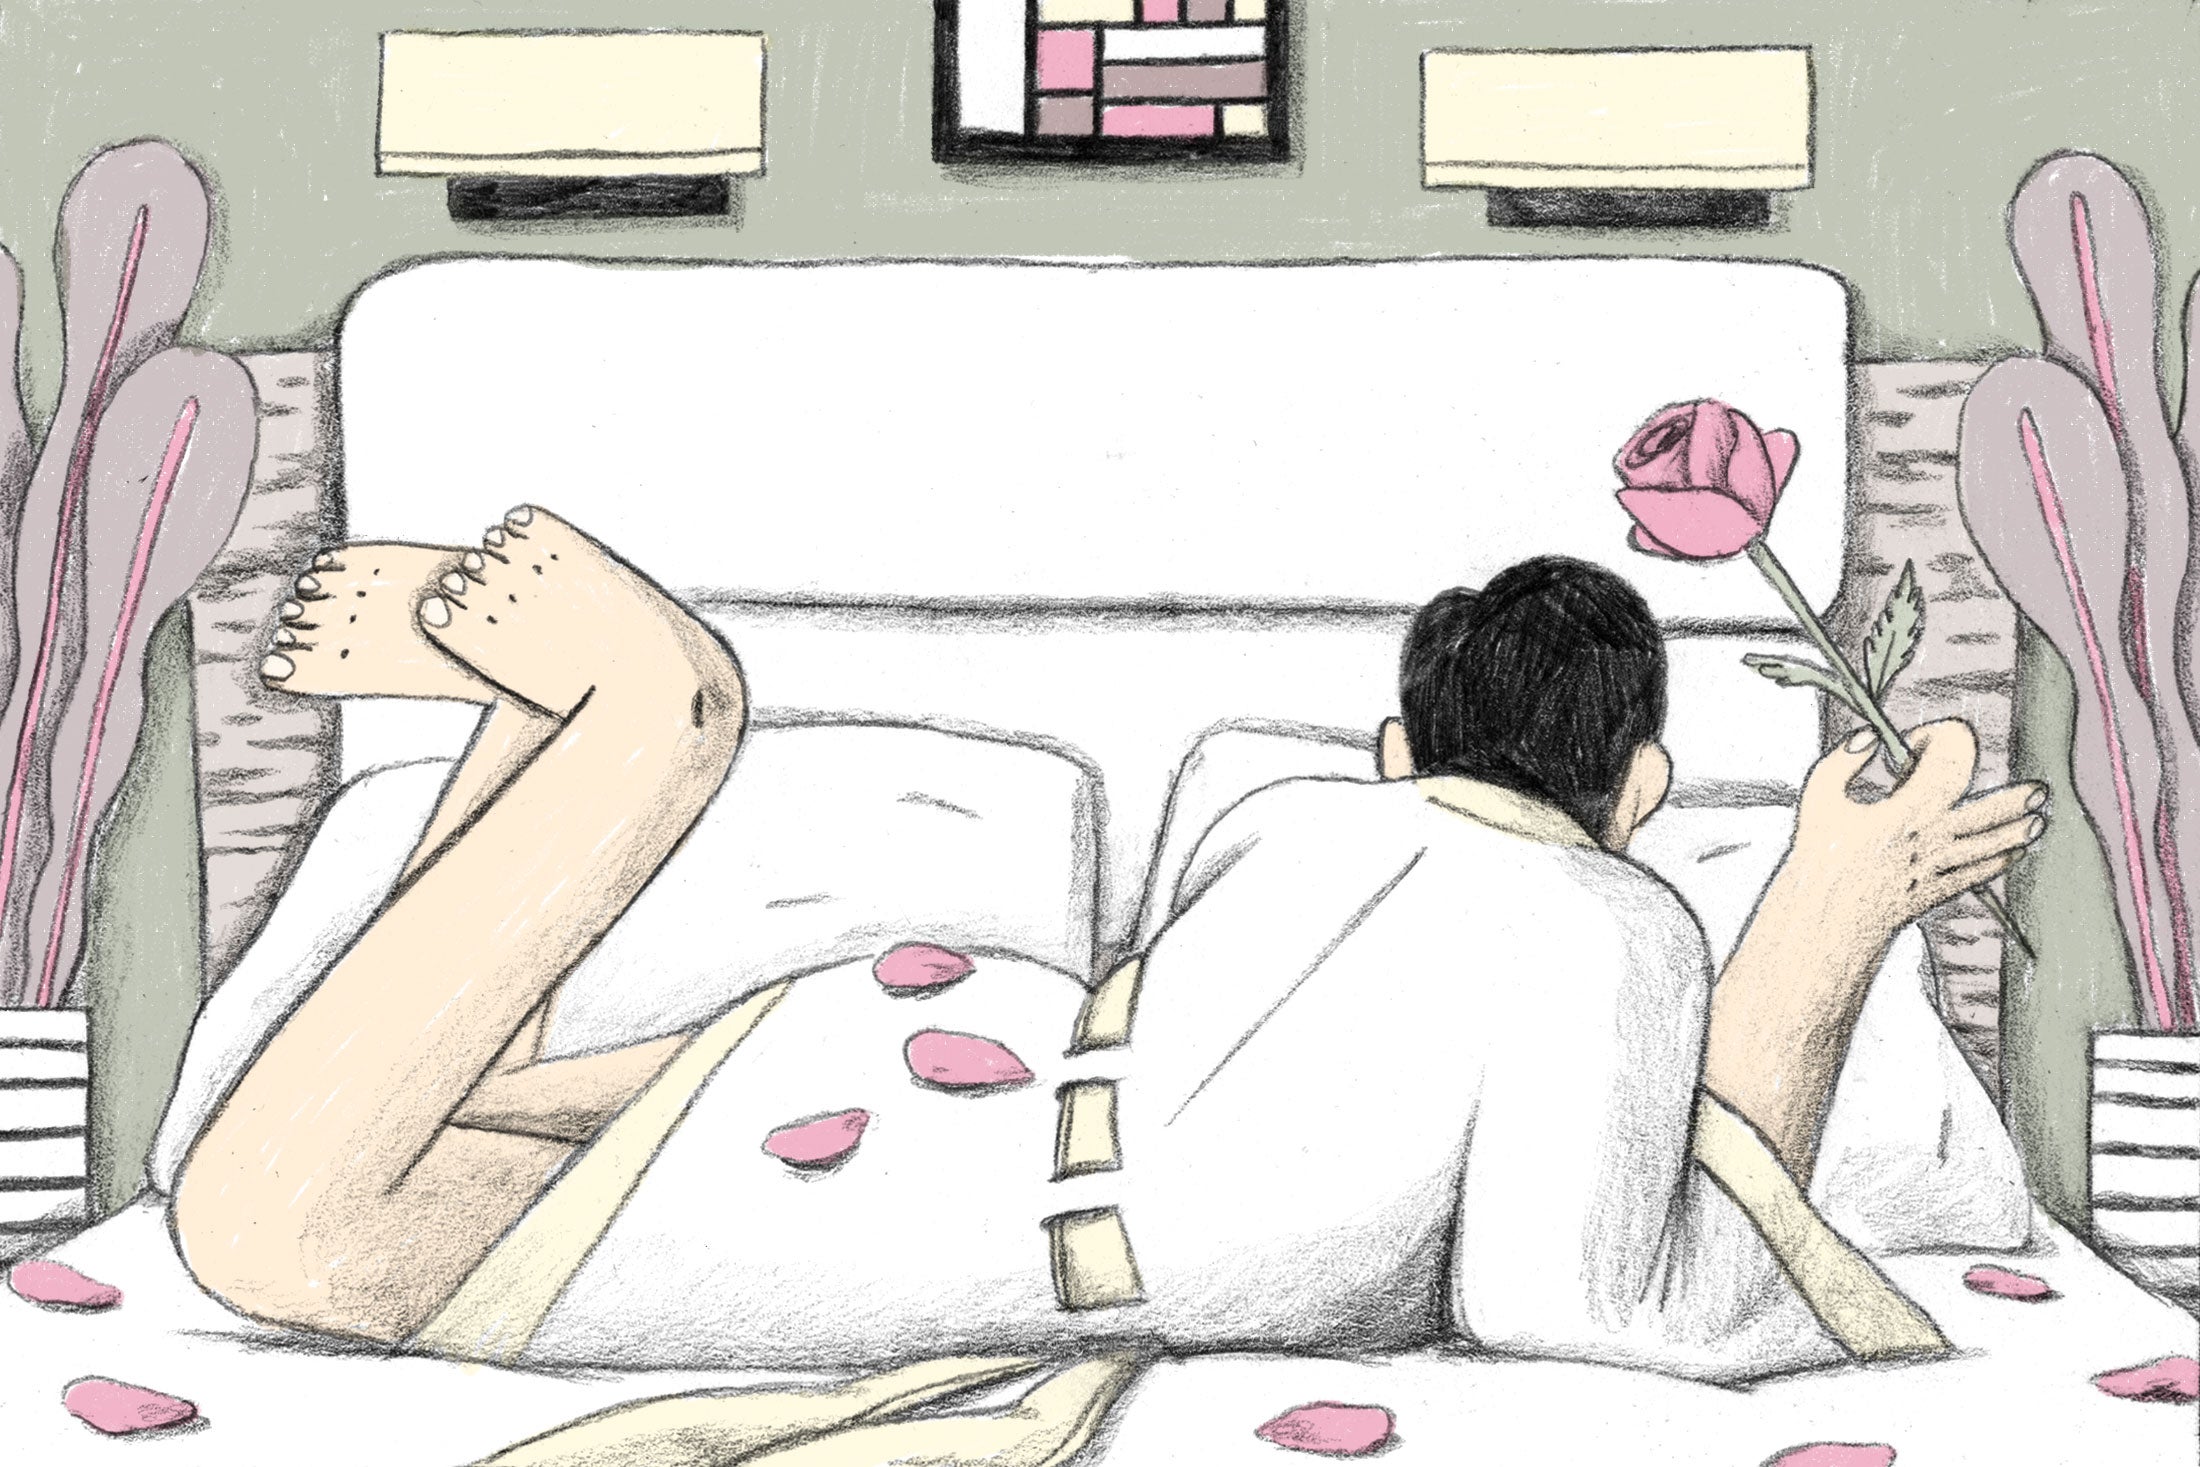 A man in a bathrobe lies on a bed covered in rose petals.